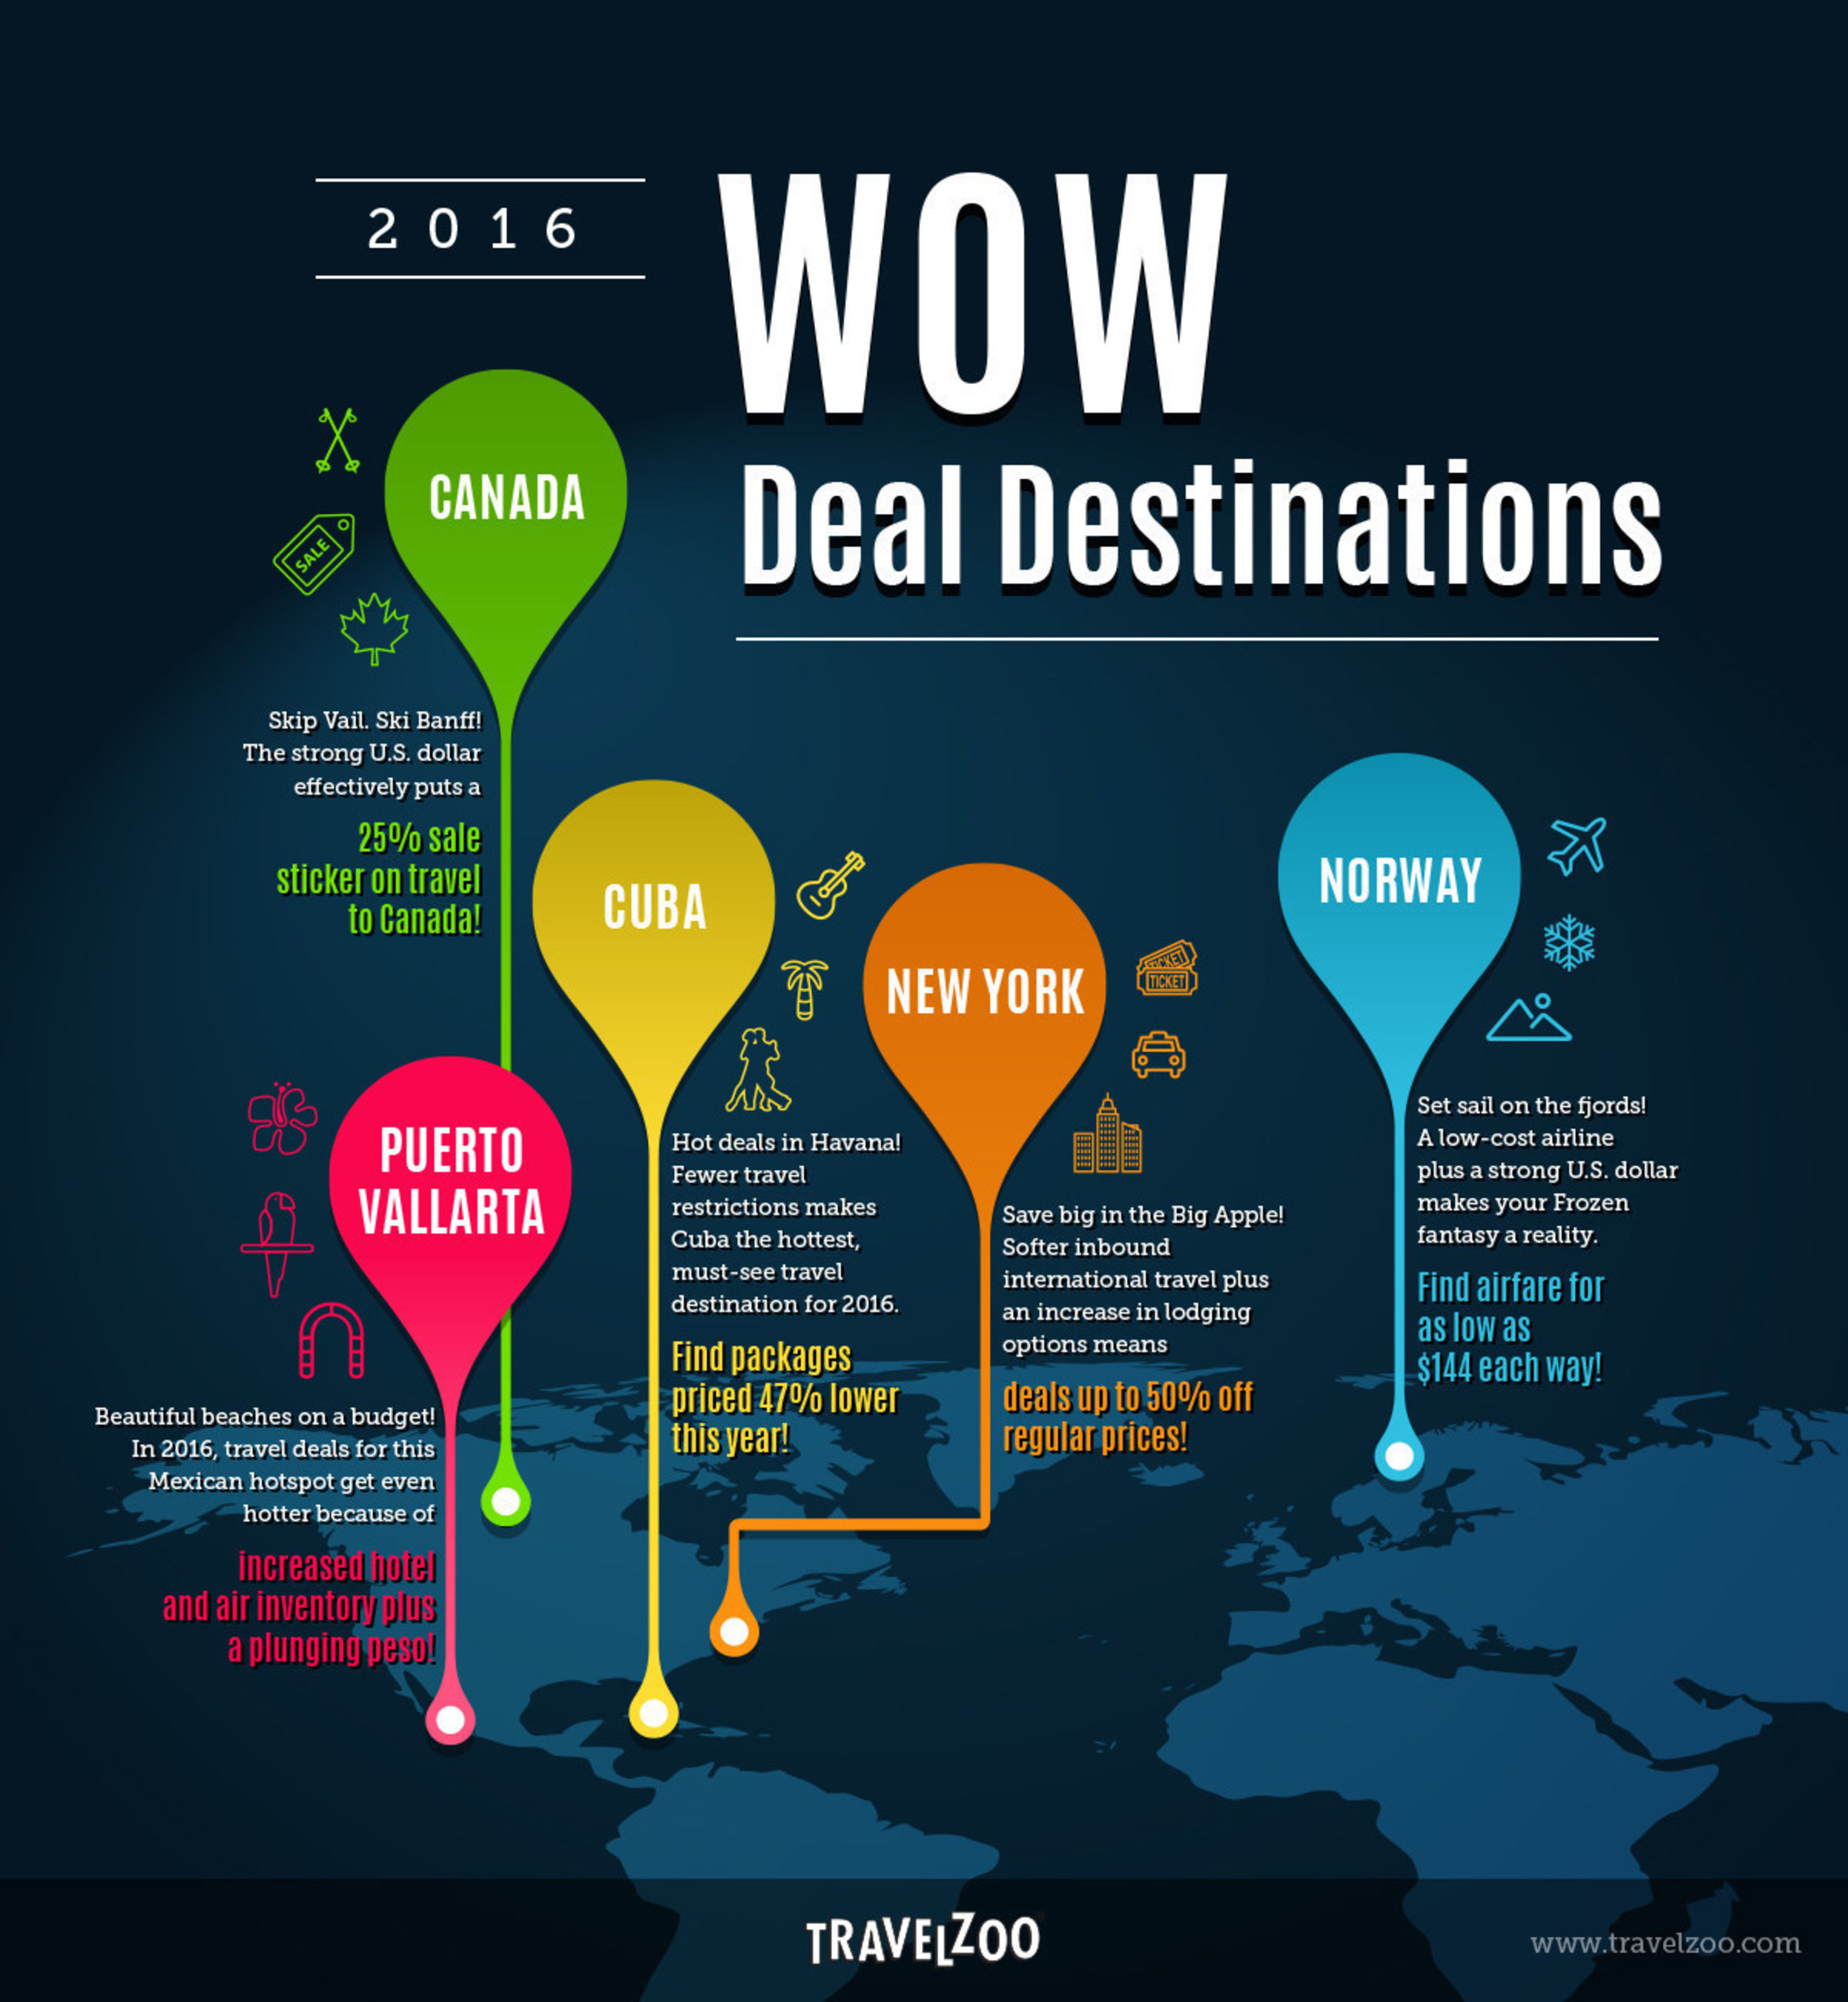 Travelzoo Predicts the Top Five Wow Deal Destinations for 2016